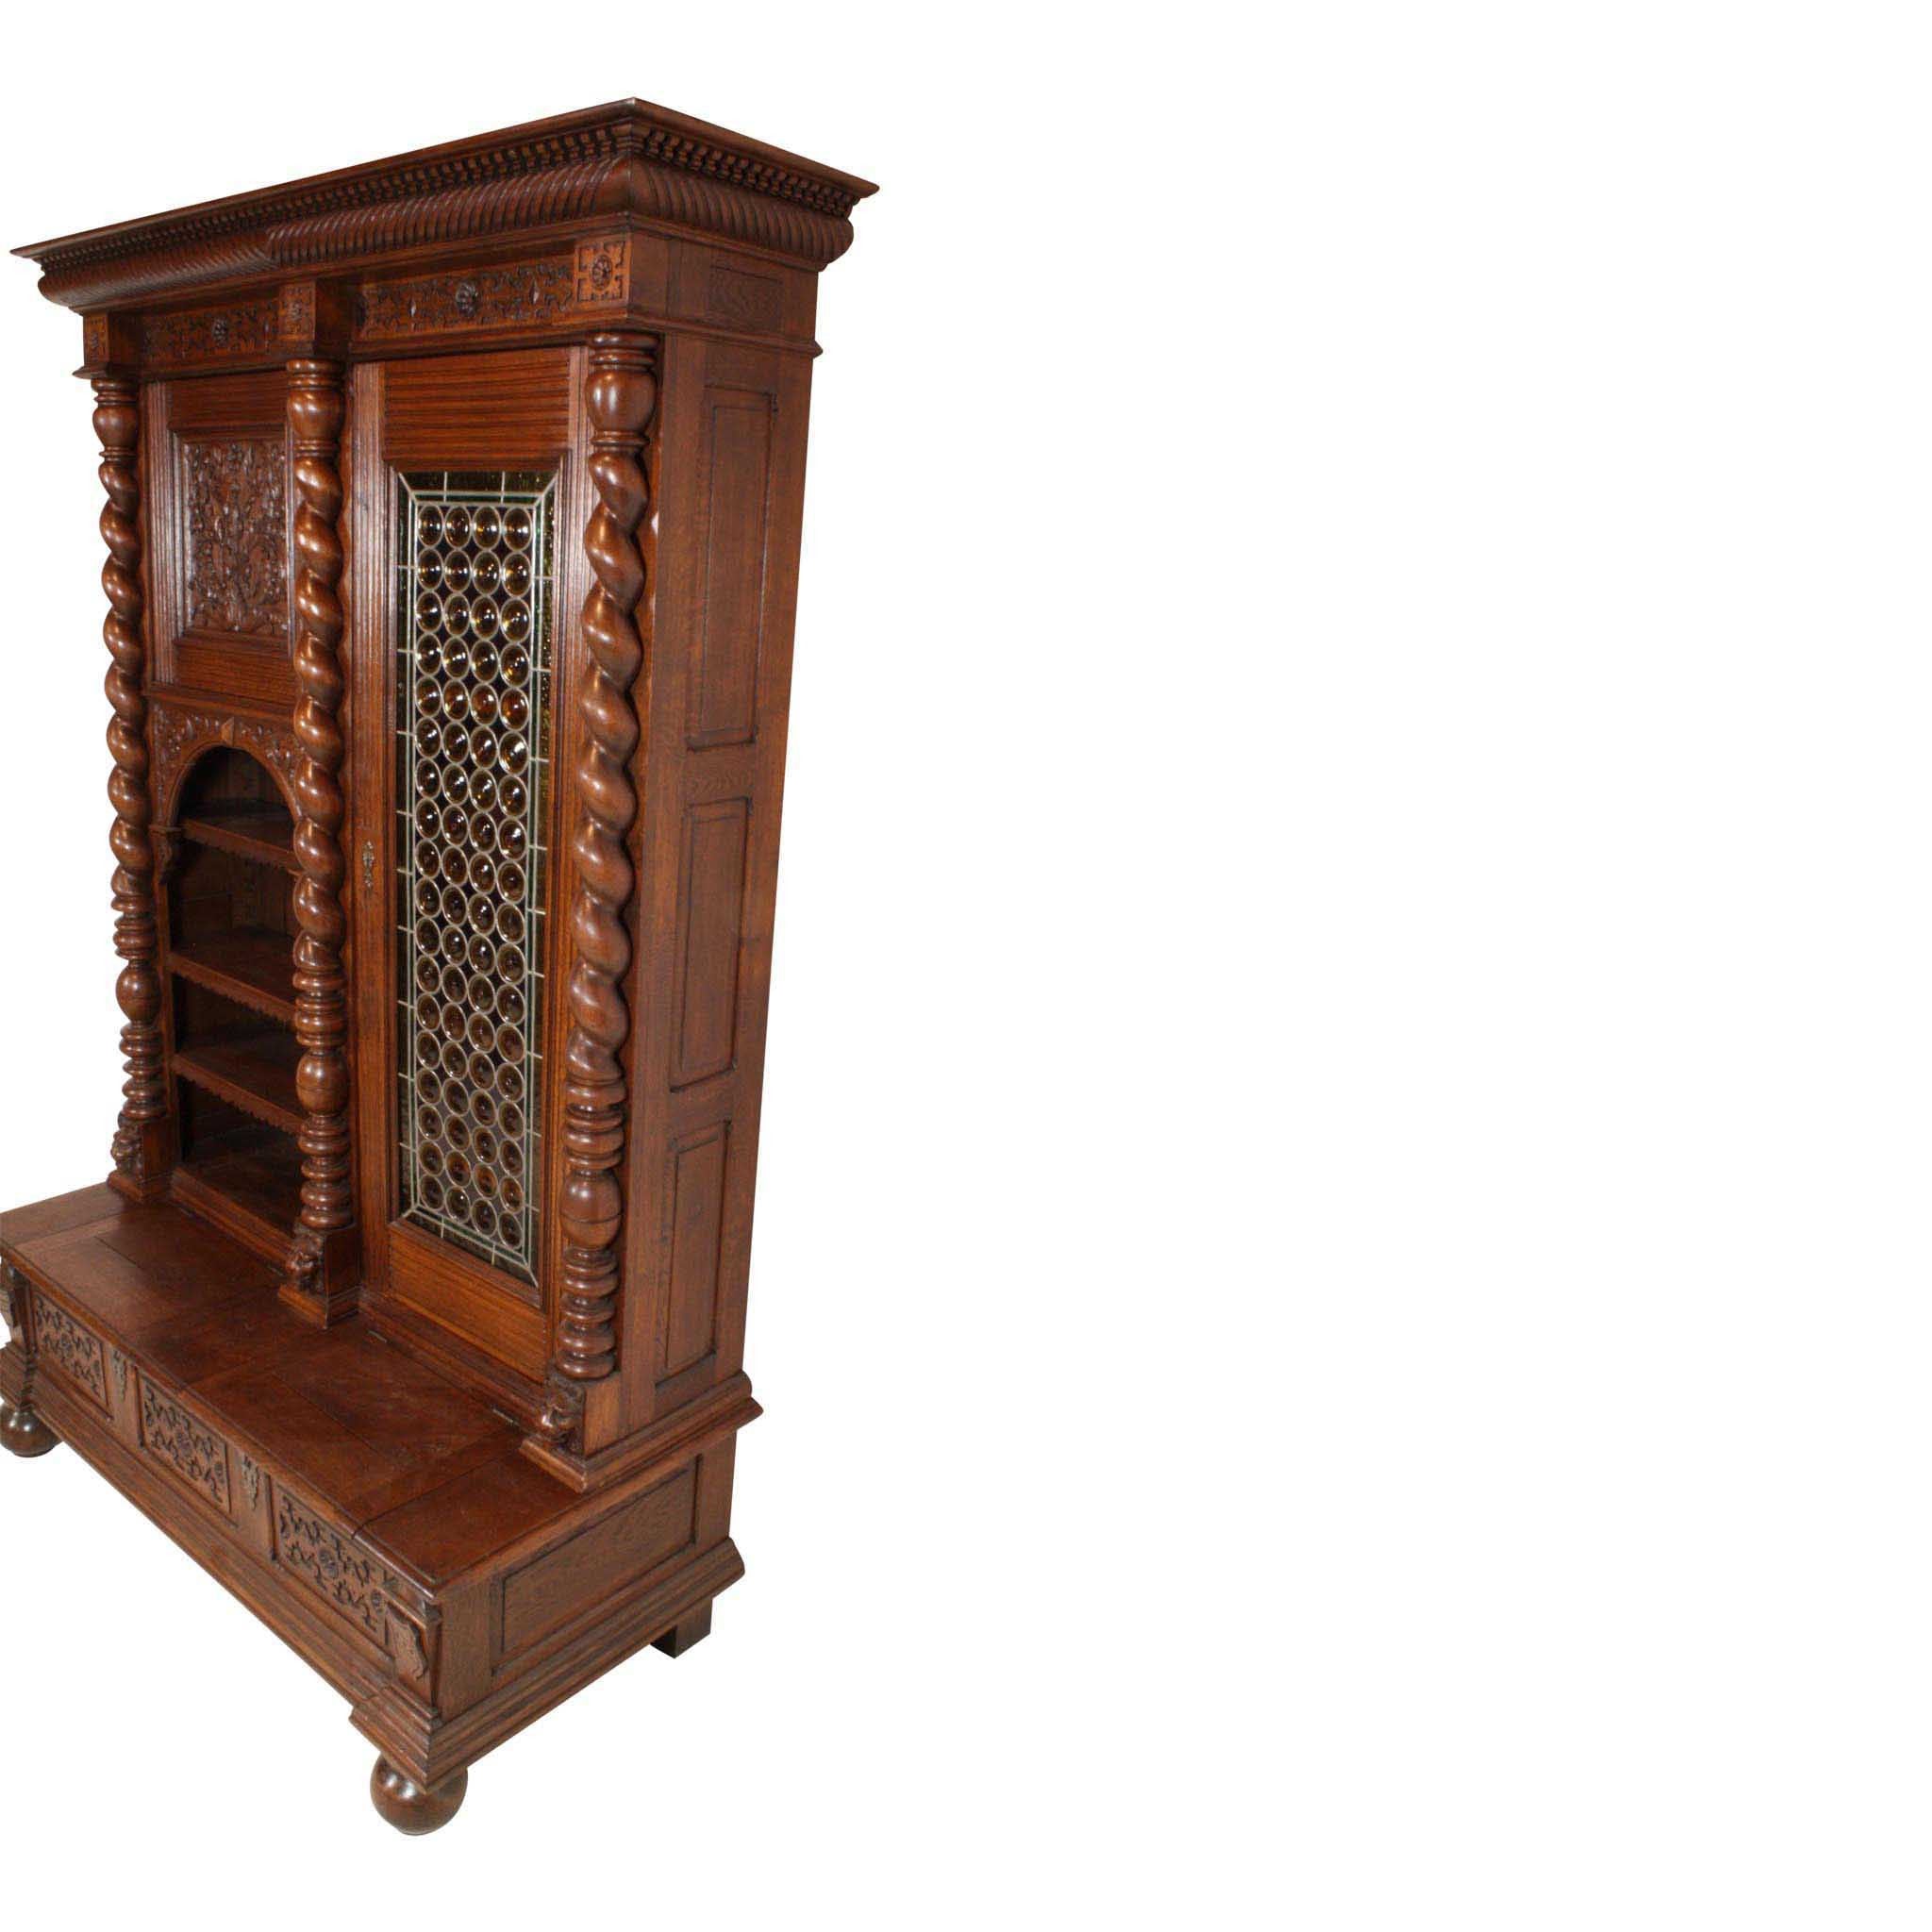 ski-country-antiques - Renaissance Style Book Case with Leaded Glass Door